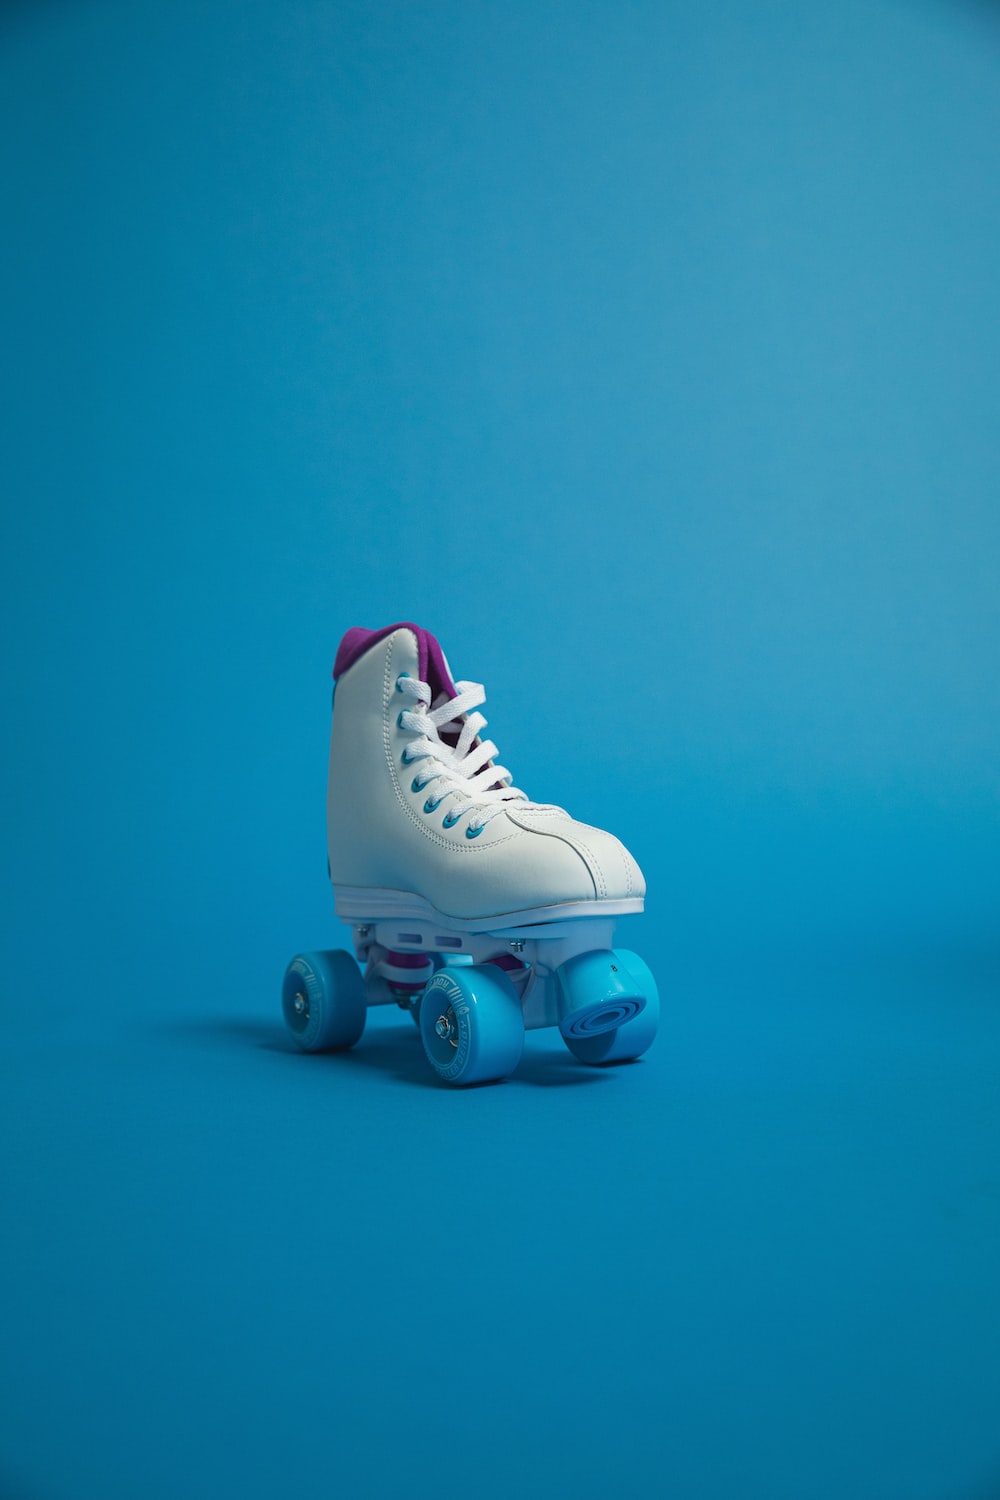 Roller skate pictures download free images on